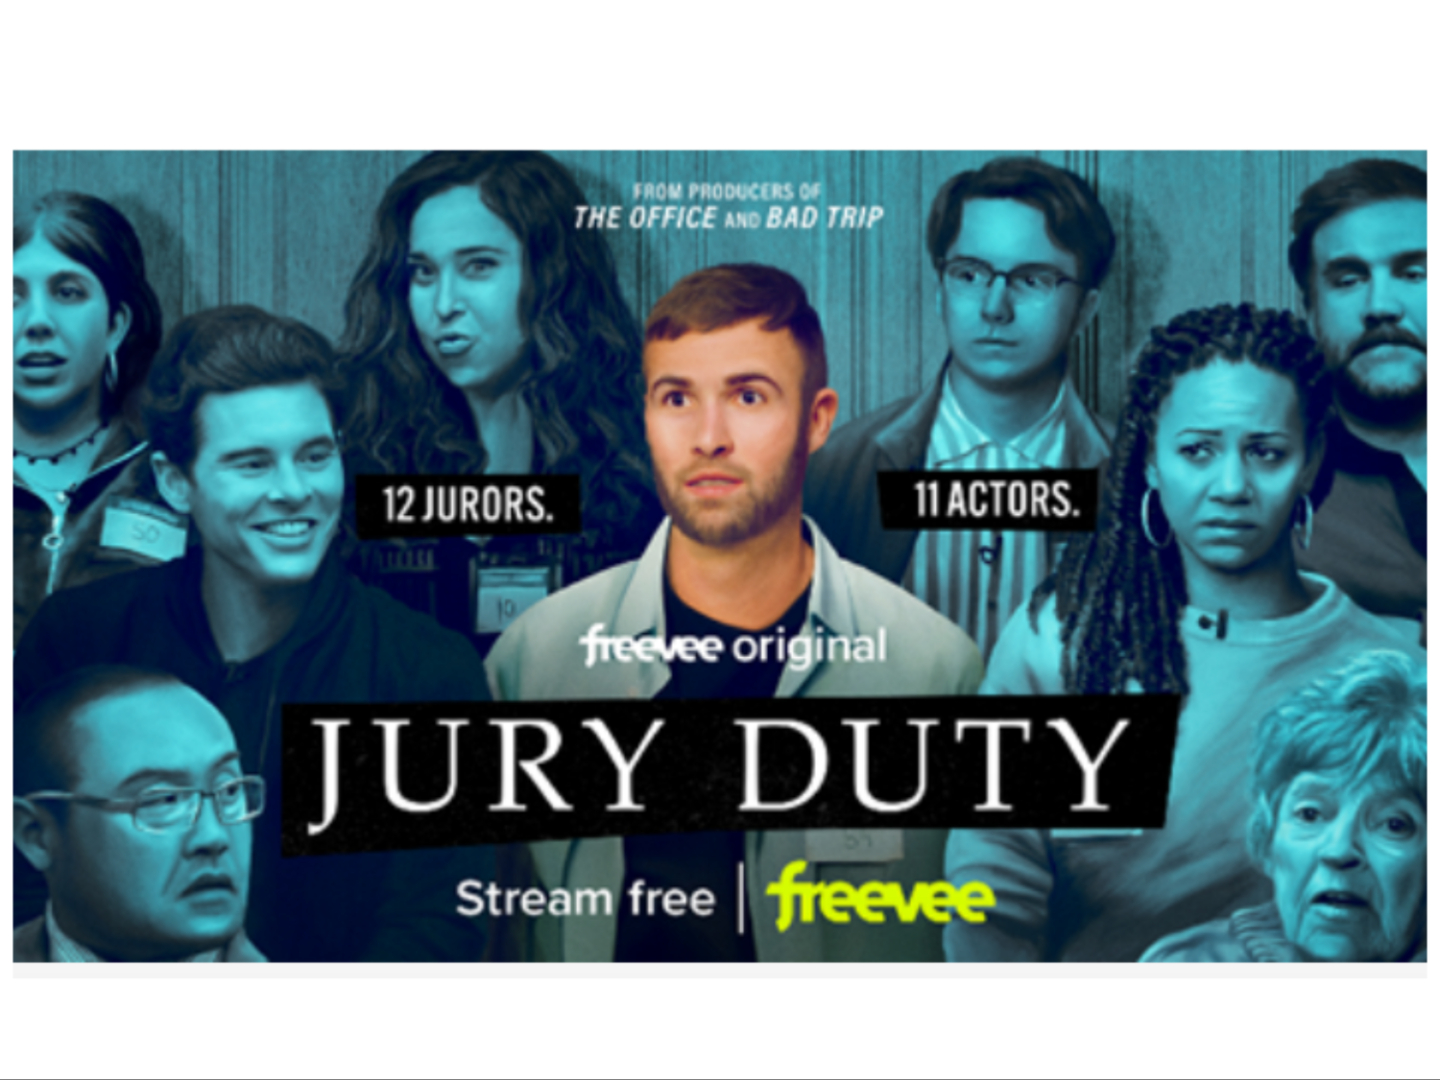 How to watch the new documentary style comedy Jury Duty on Amazon Freevee 